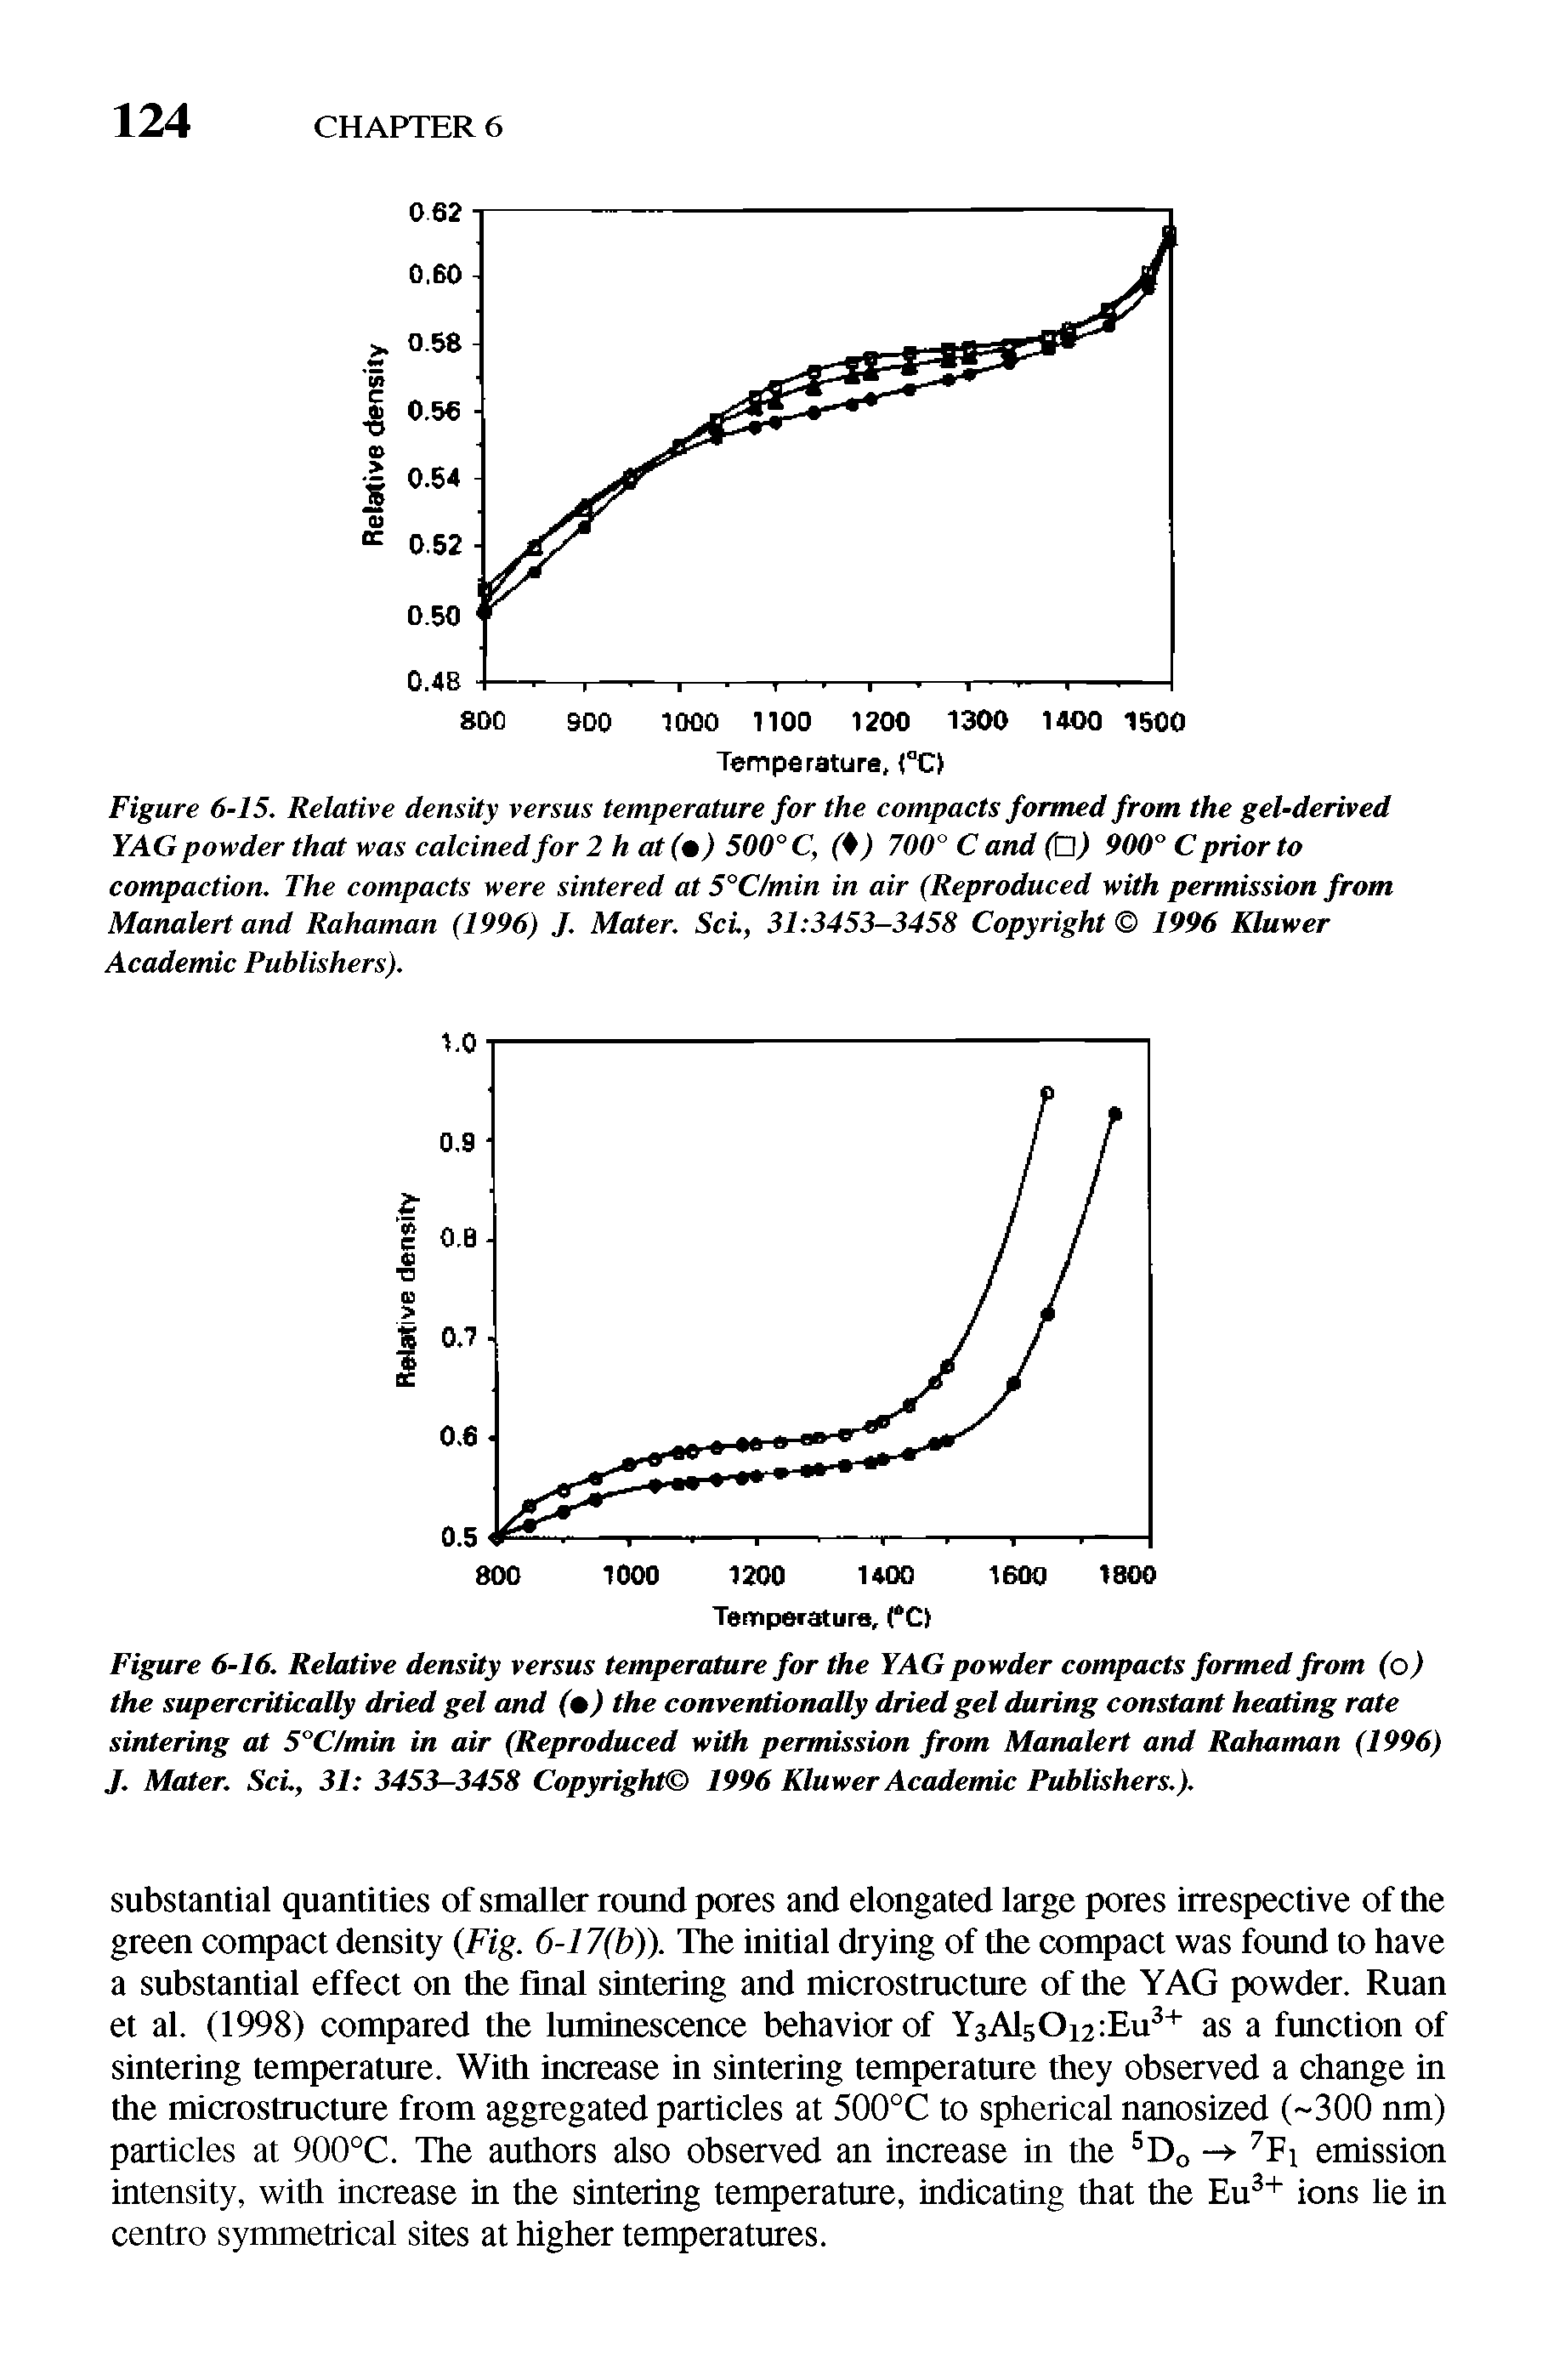 Figure 6-16. Relative density versus temperature for the YAG powder compacts formed from (o) the supercritically dried gel and ( ) the conventionally dried gel during constant heating rate sintering at 5°C/min in air (Reproduced with permission from Manalert and Rahaman (1996) J. Mater. ScL, 31 3453—3458 Copyright 1996 Kluwer Acadentic Publishers.).